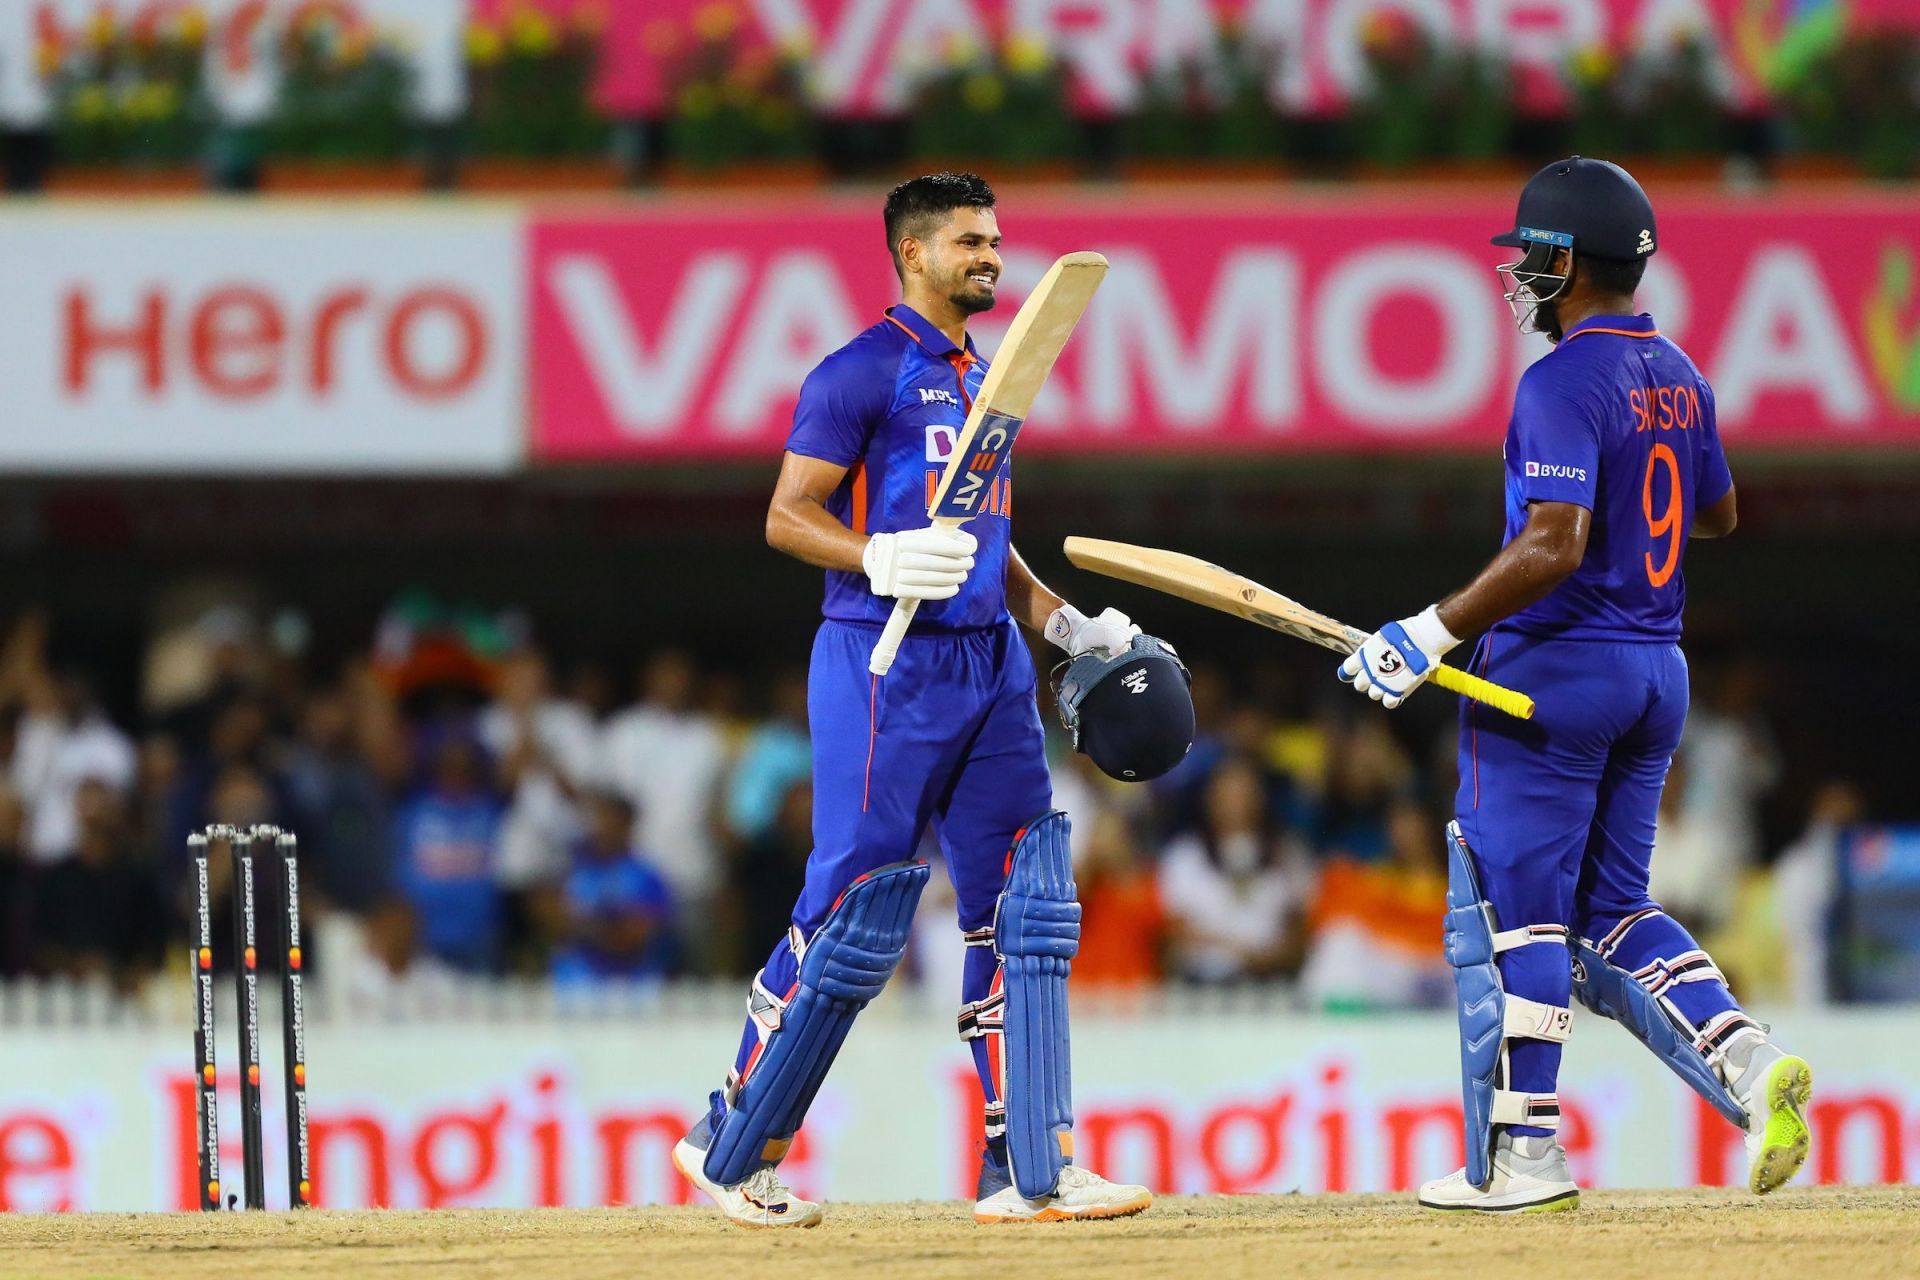 Shreyas Iyer and Sanju Samson stayed till the end to finish the game. (Credits: Twitter)